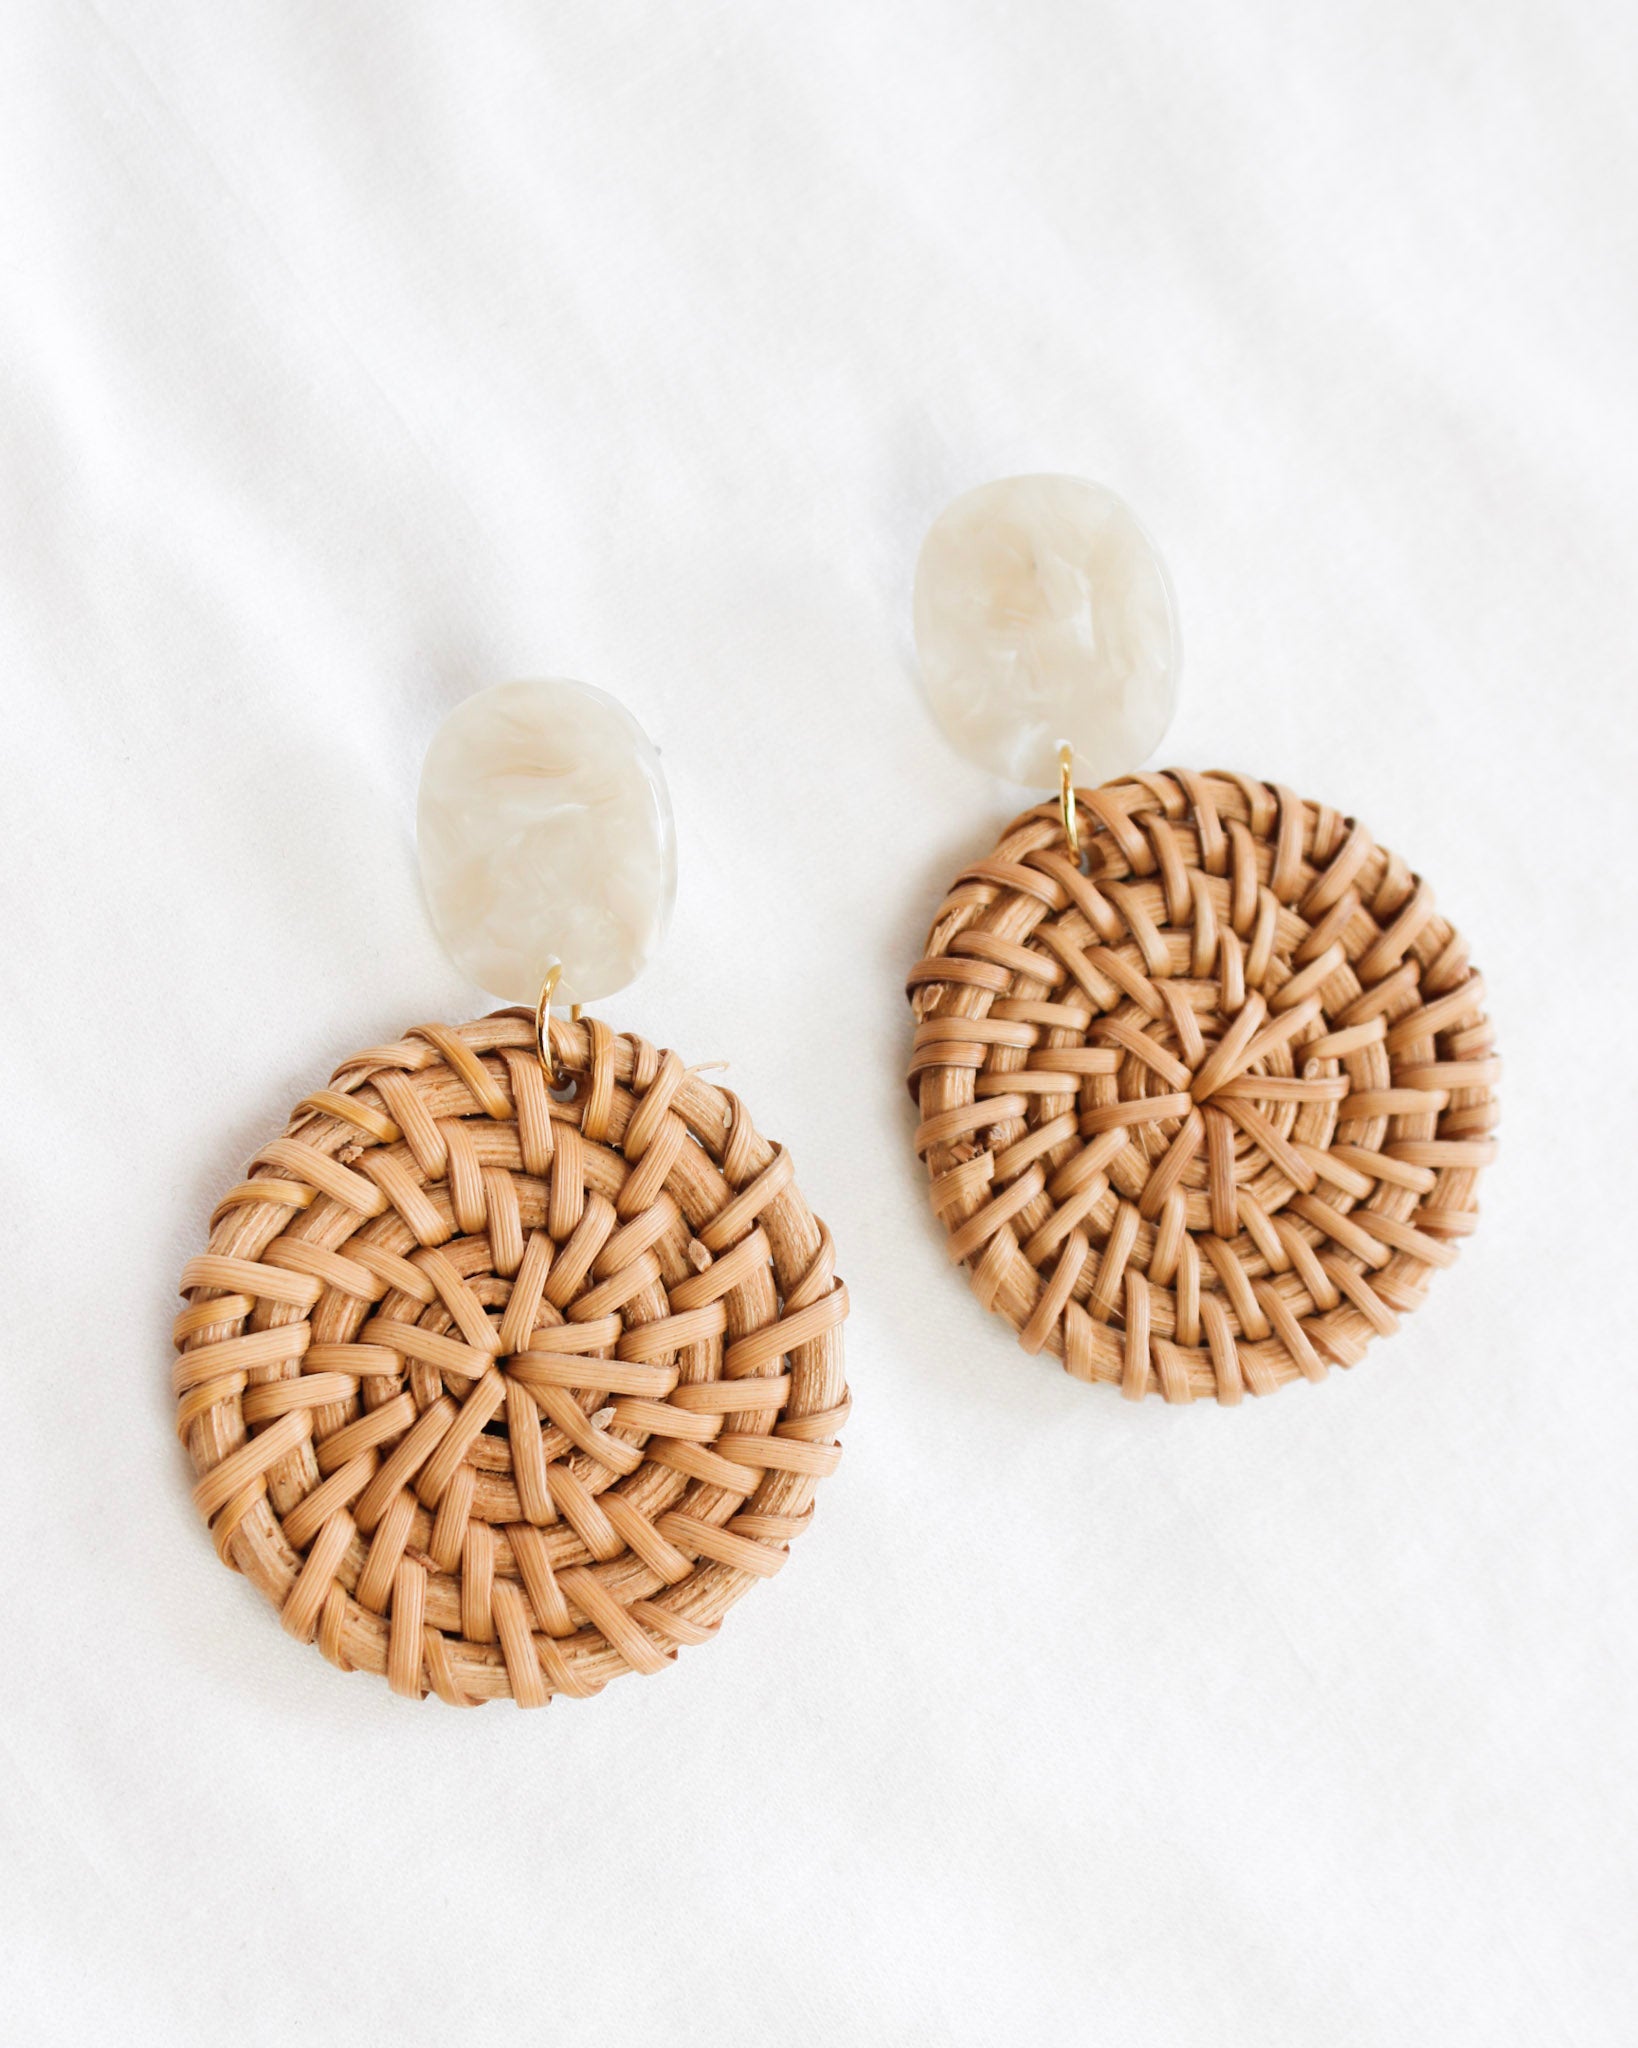 Boho style statement earring with marble oval into weave basket round circle and gold accents 